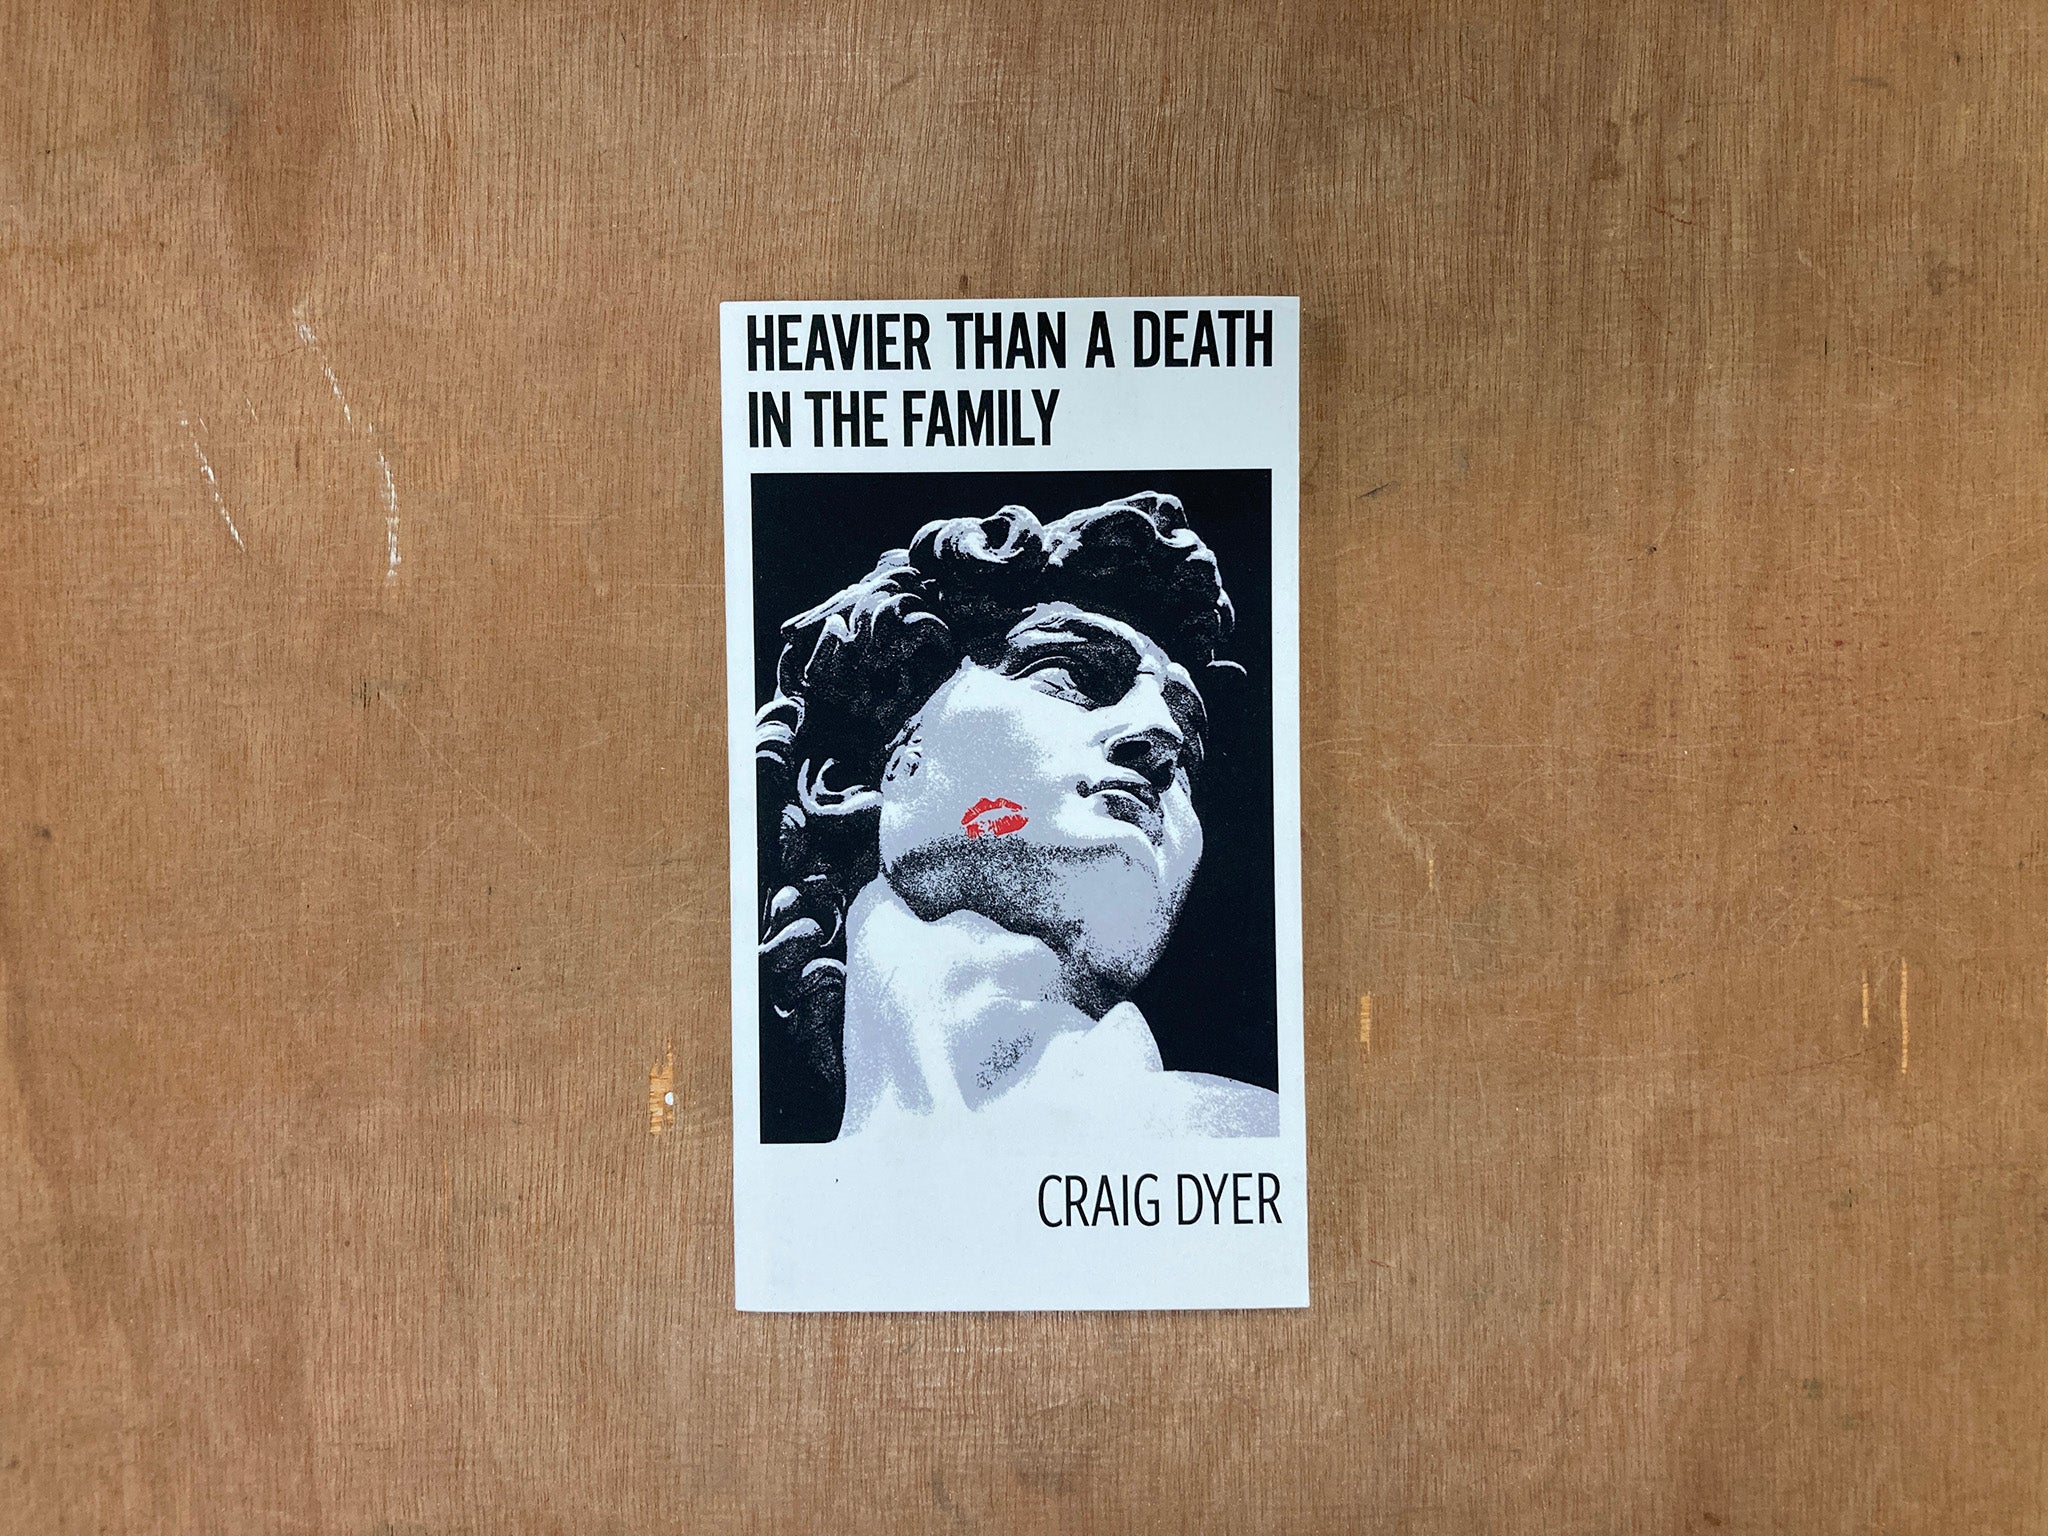 HEAVIER THAN A DEATH IN THE FAMILY by Craig Dyer